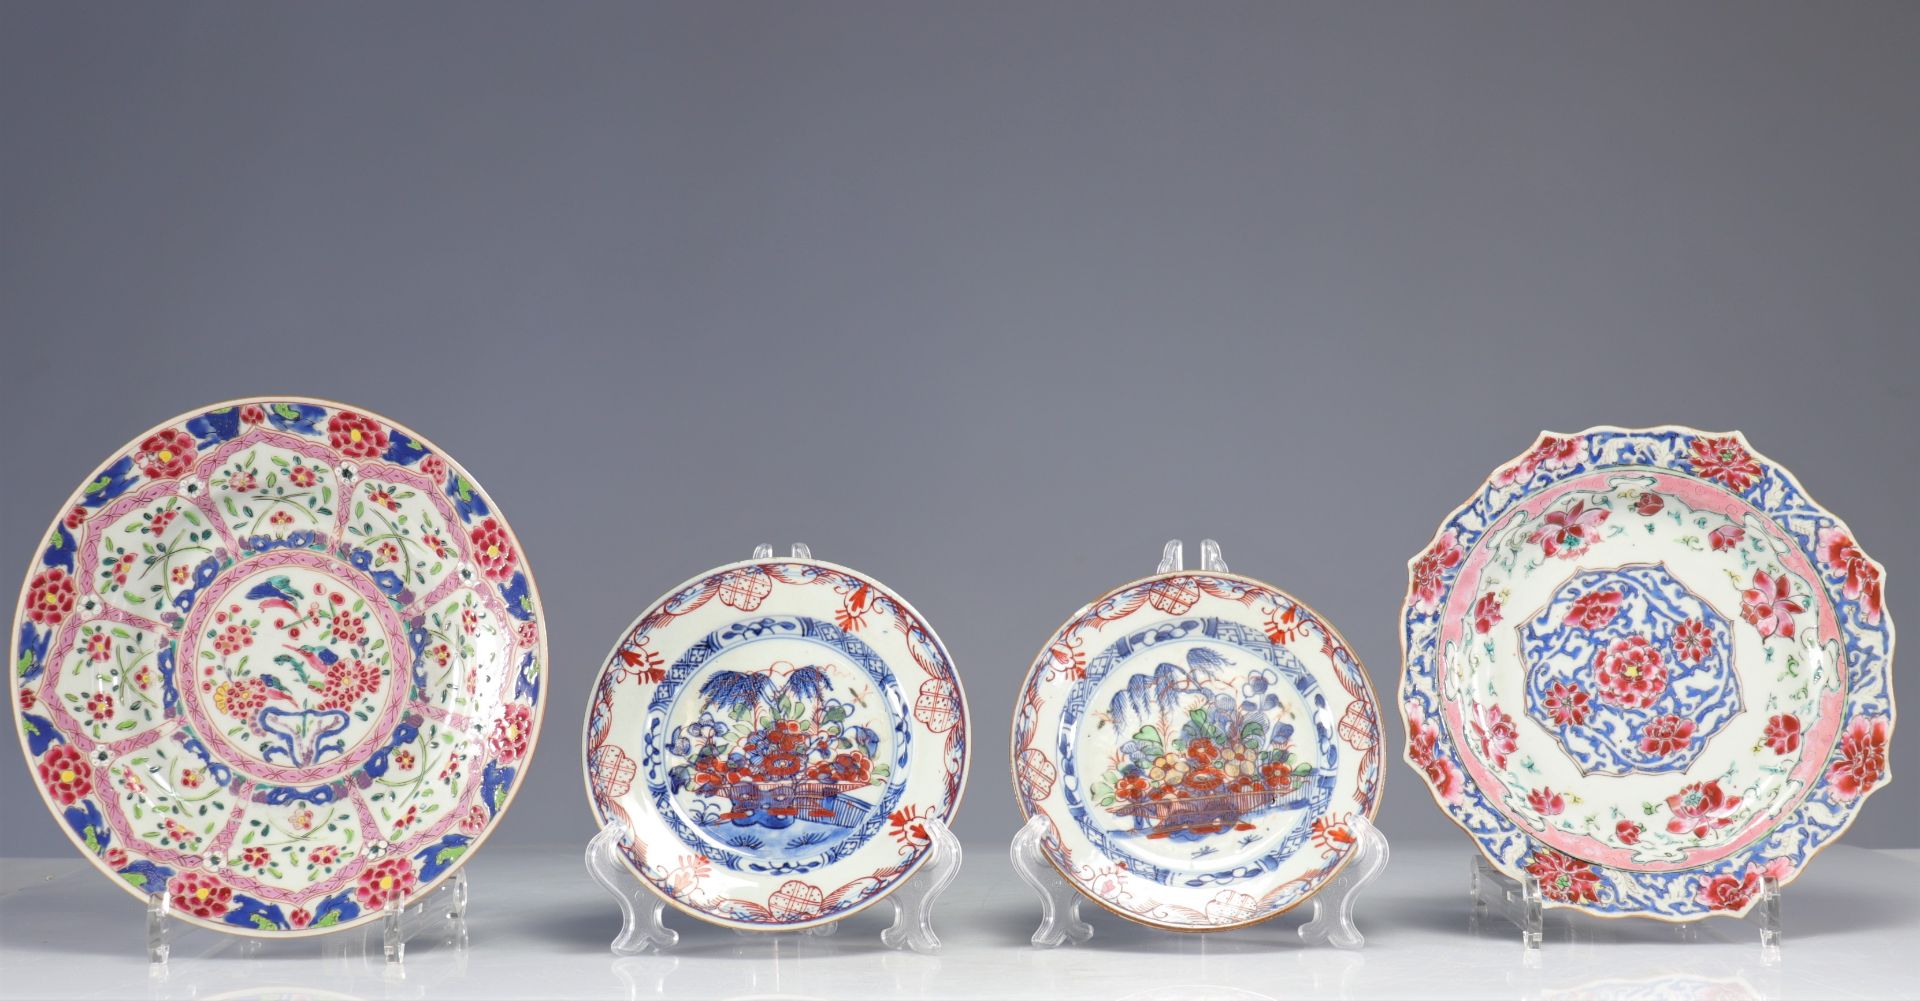 Plates (4) in 18th century famille rose porcelain decorated with flowers